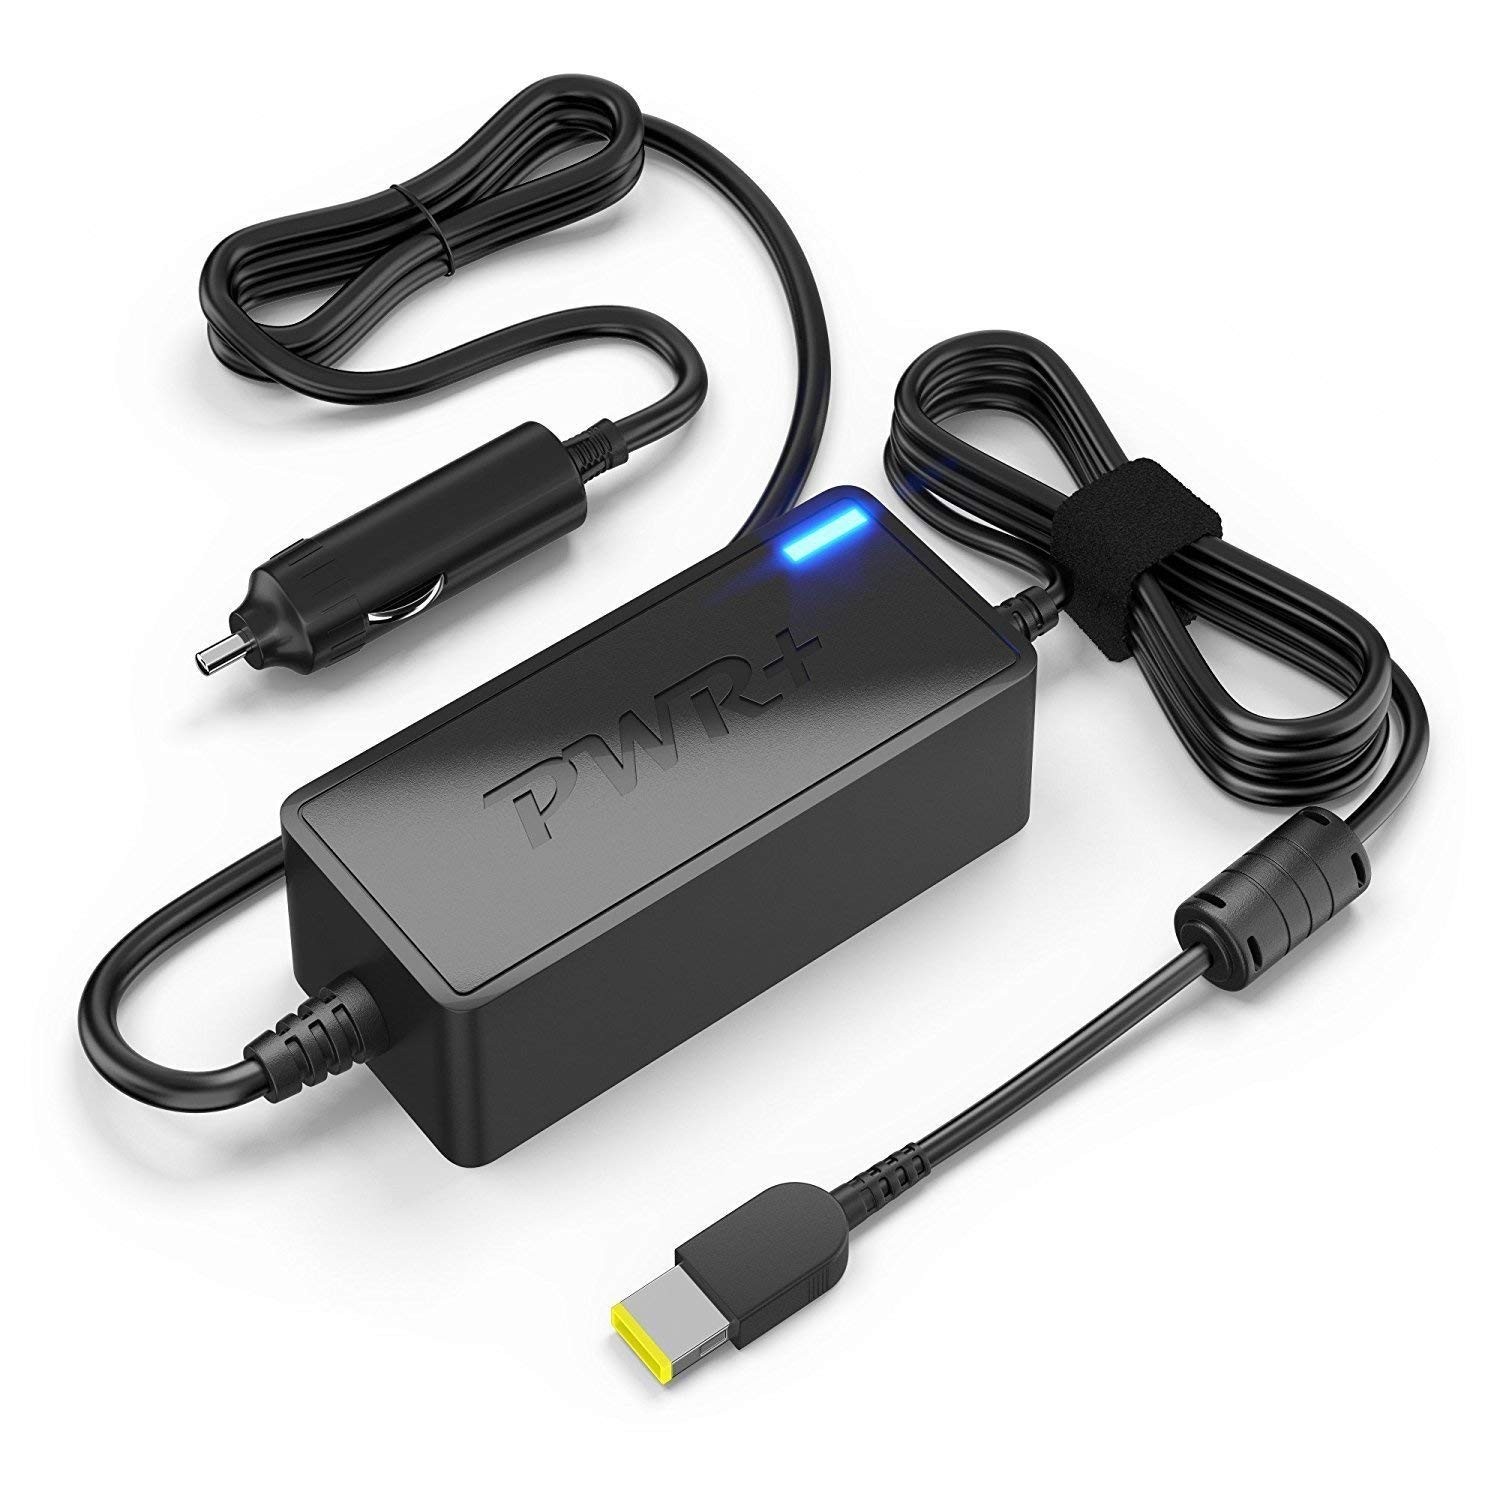 Lenovo Laptop CAR Charger Power Adapter